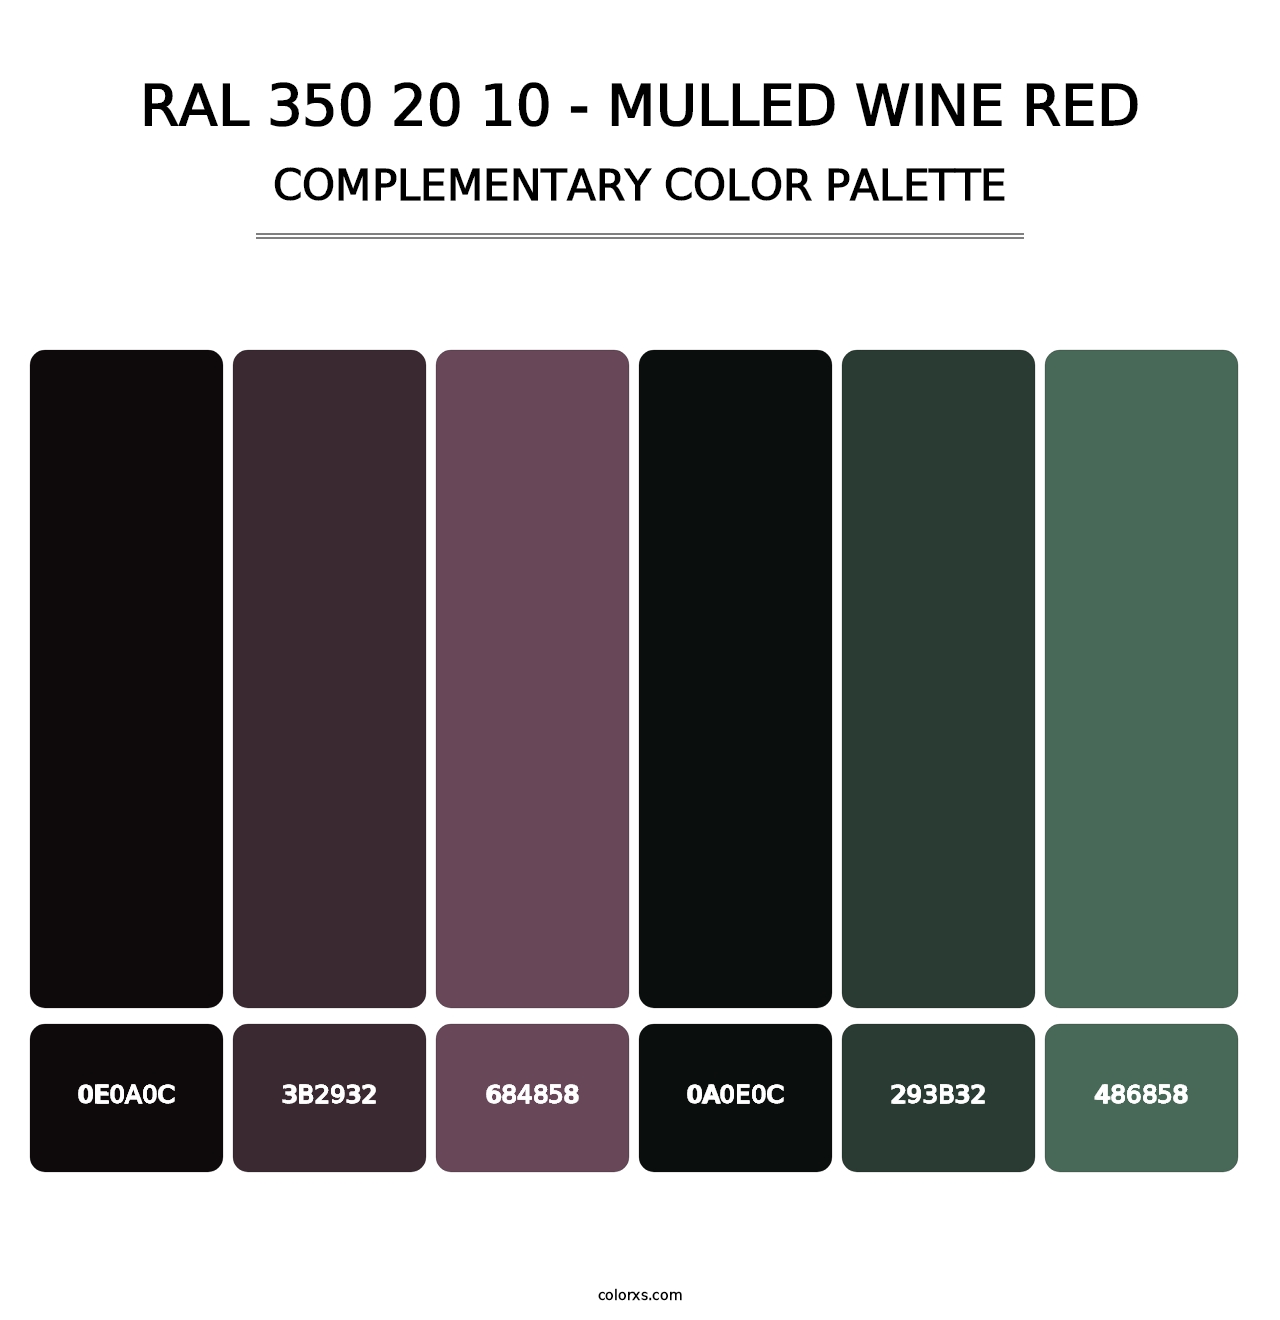 RAL 350 20 10 - Mulled Wine Red - Complementary Color Palette